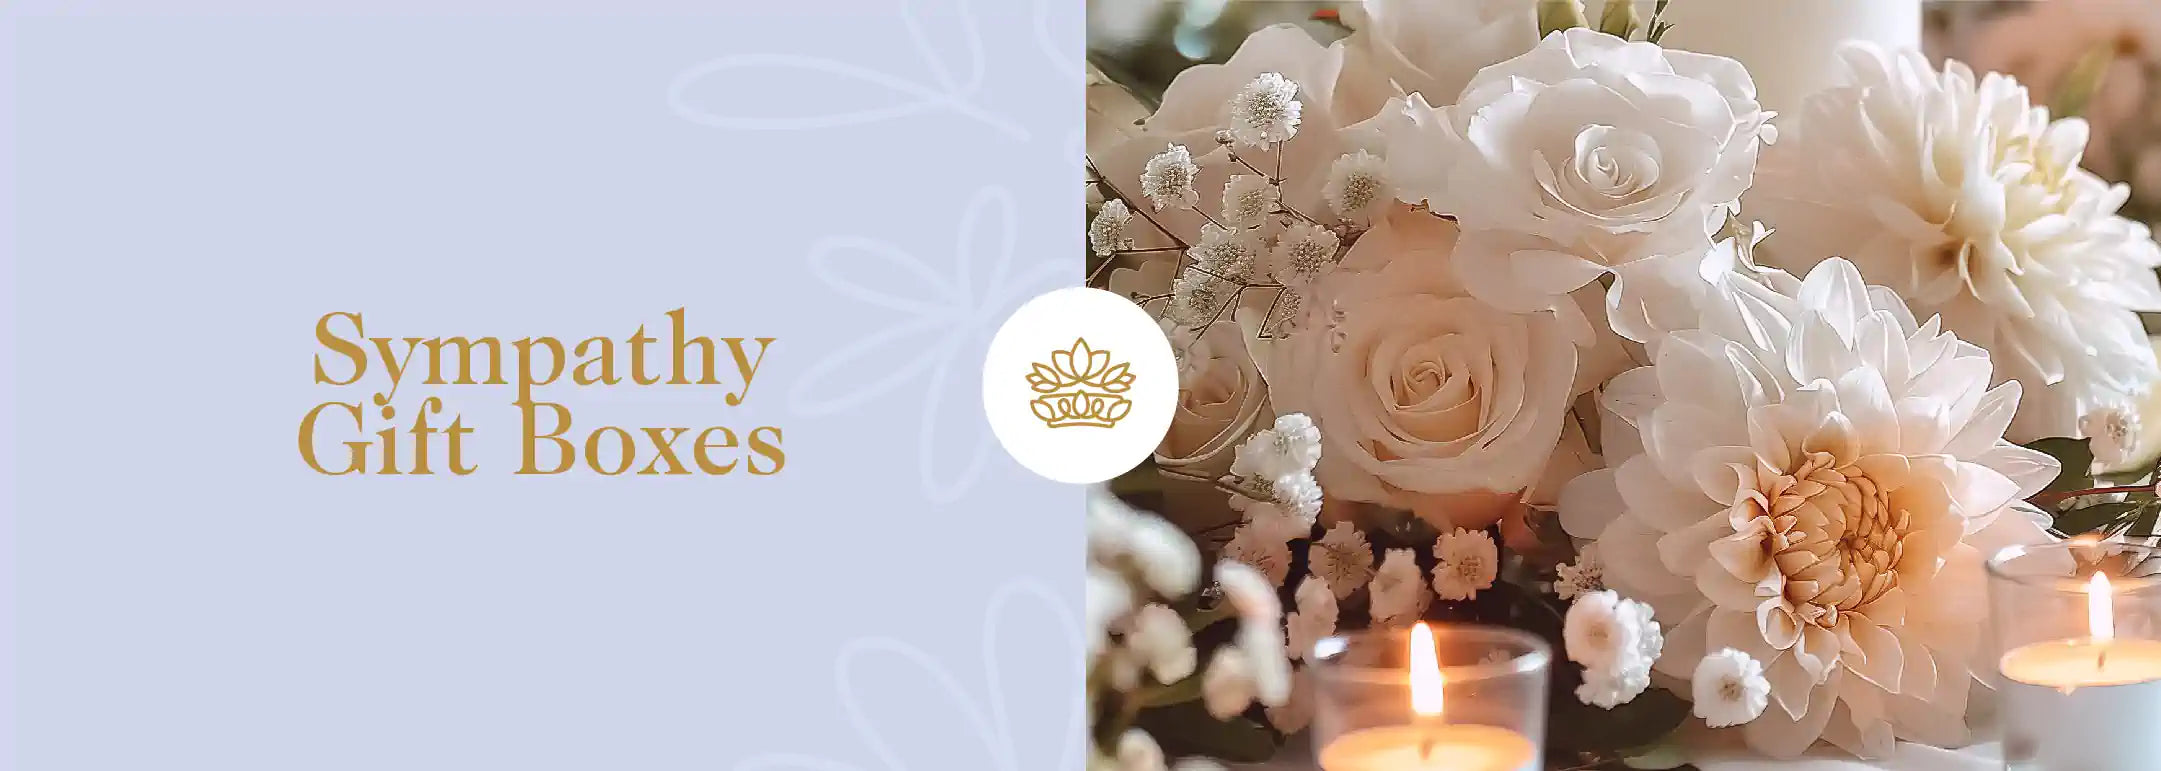 White and peach flowers with a lit candle symbolising Sympathy Gift Boxes collection from Fabulous Flowers and Gifts